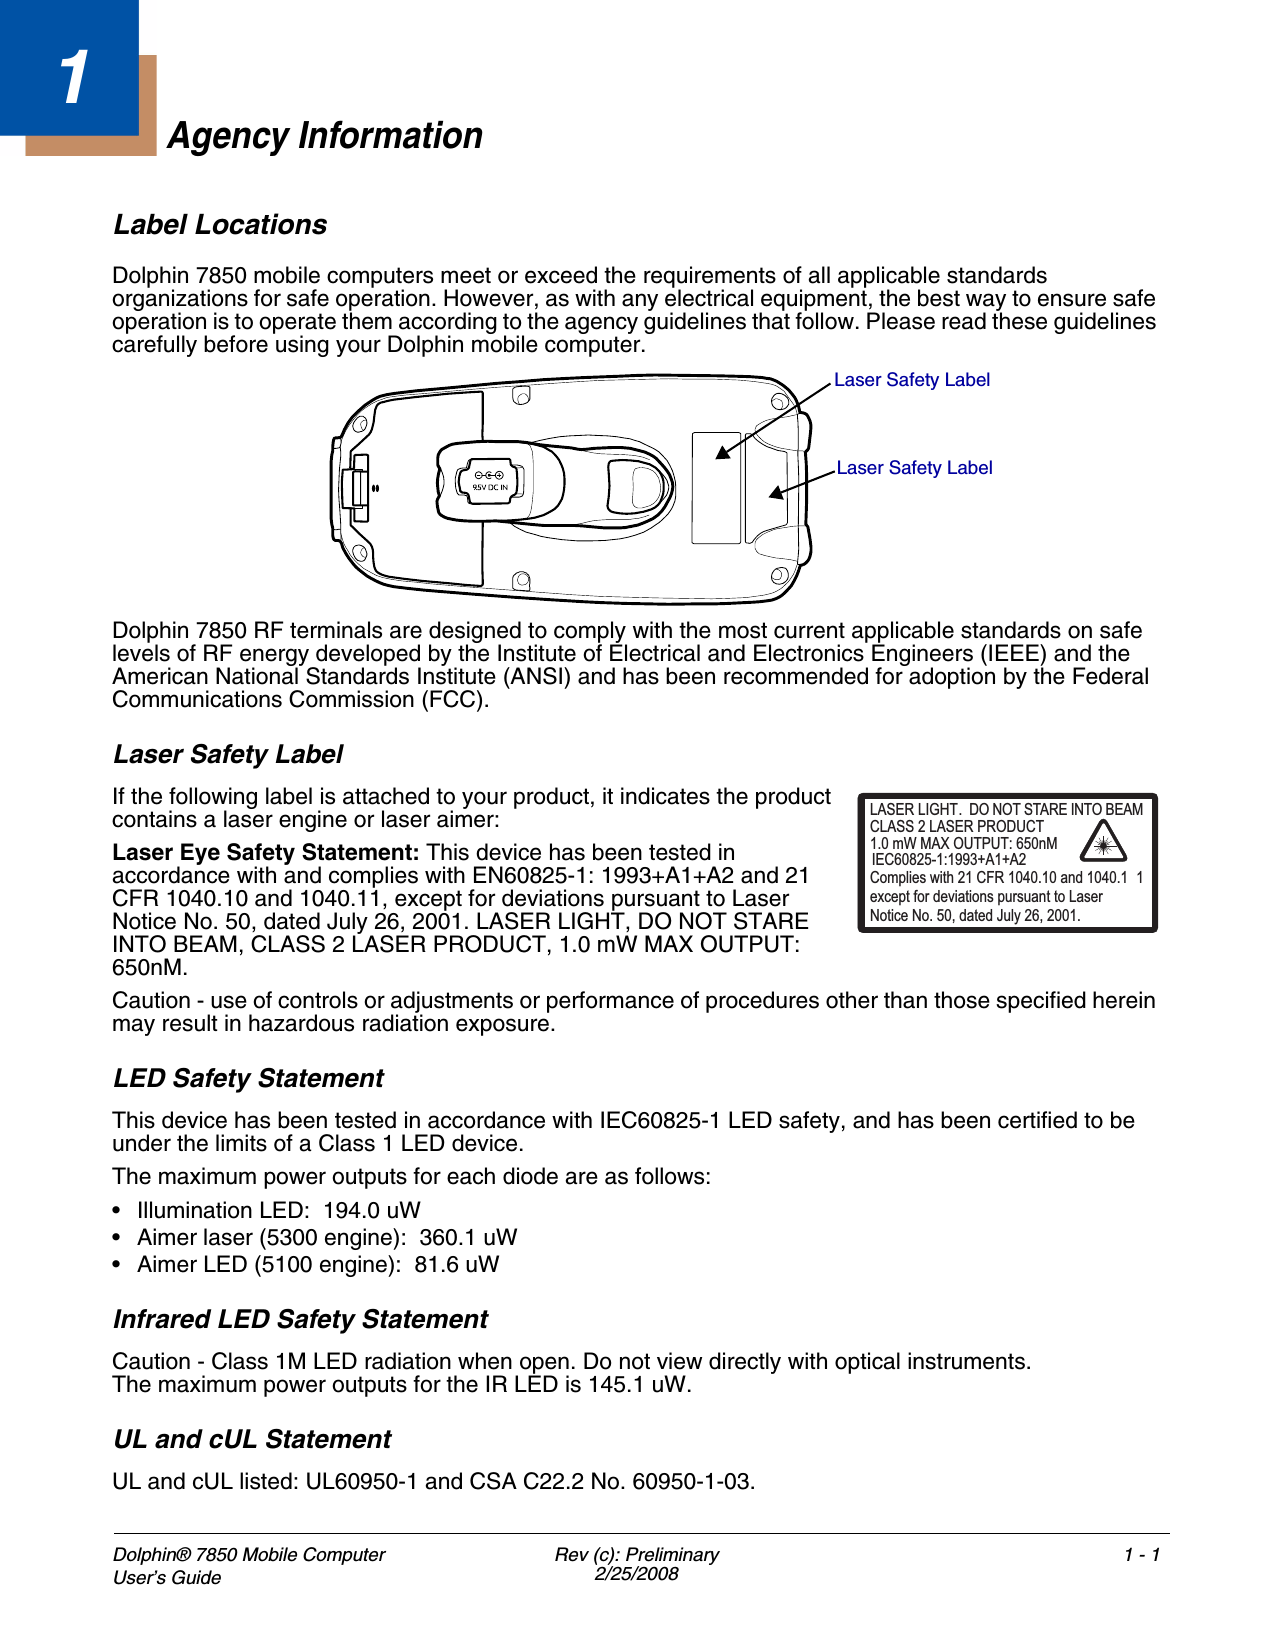 Dolphin® 7850 Mobile Computer User’s Guide Rev (c): Preliminary2/25/20081 - 11Agency InformationLabel LocationsDolphin 7850 mobile computers meet or exceed the requirements of all applicable standards organizations for safe operation. However, as with any electrical equipment, the best way to ensure safe operation is to operate them according to the agency guidelines that follow. Please read these guidelines carefully before using your Dolphin mobile computer. Dolphin 7850 RF terminals are designed to comply with the most current applicable standards on safe levels of RF energy developed by the Institute of Electrical and Electronics Engineers (IEEE) and the American National Standards Institute (ANSI) and has been recommended for adoption by the Federal Communications Commission (FCC). Laser Safety LabelIf the following label is attached to your product, it indicates the product contains a laser engine or laser aimer: Laser Eye Safety Statement: This device has been tested in accordance with and complies with EN60825-1: 1993+A1+A2 and 21 CFR 1040.10 and 1040.11, except for deviations pursuant to Laser Notice No. 50, dated July 26, 2001. LASER LIGHT, DO NOT STARE INTO BEAM, CLASS 2 LASER PRODUCT, 1.0 mW MAX OUTPUT: 650nM. Caution - use of controls or adjustments or performance of procedures other than those specified herein may result in hazardous radiation exposure.LED Safety StatementThis device has been tested in accordance with IEC60825-1 LED safety, and has been certified to be under the limits of a Class 1 LED device.The maximum power outputs for each diode are as follows:• Illumination LED:  194.0 uW• Aimer laser (5300 engine):  360.1 uW• Aimer LED (5100 engine):  81.6 uWInfrared LED Safety StatementCaution - Class 1M LED radiation when open. Do not view directly with optical instruments. The maximum power outputs for the IR LED is 145.1 uW.UL and cUL StatementUL and cUL listed: UL60950-1 and CSA C22.2 No. 60950-1-03.Laser Safety LabelLaser Safety LabelLASER LIGHT. DO NOT STARE INTO BEAM1.0 mW MAX OUTPUT: 650nMIEC60825-1:1993+A1+A2CLASS 2 LASER PRODUCTComplies with 21 CFR 1040.10 and 1040.1 1except for deviations pursuant to Laser Notice No. 50, dated July 26, 2001.